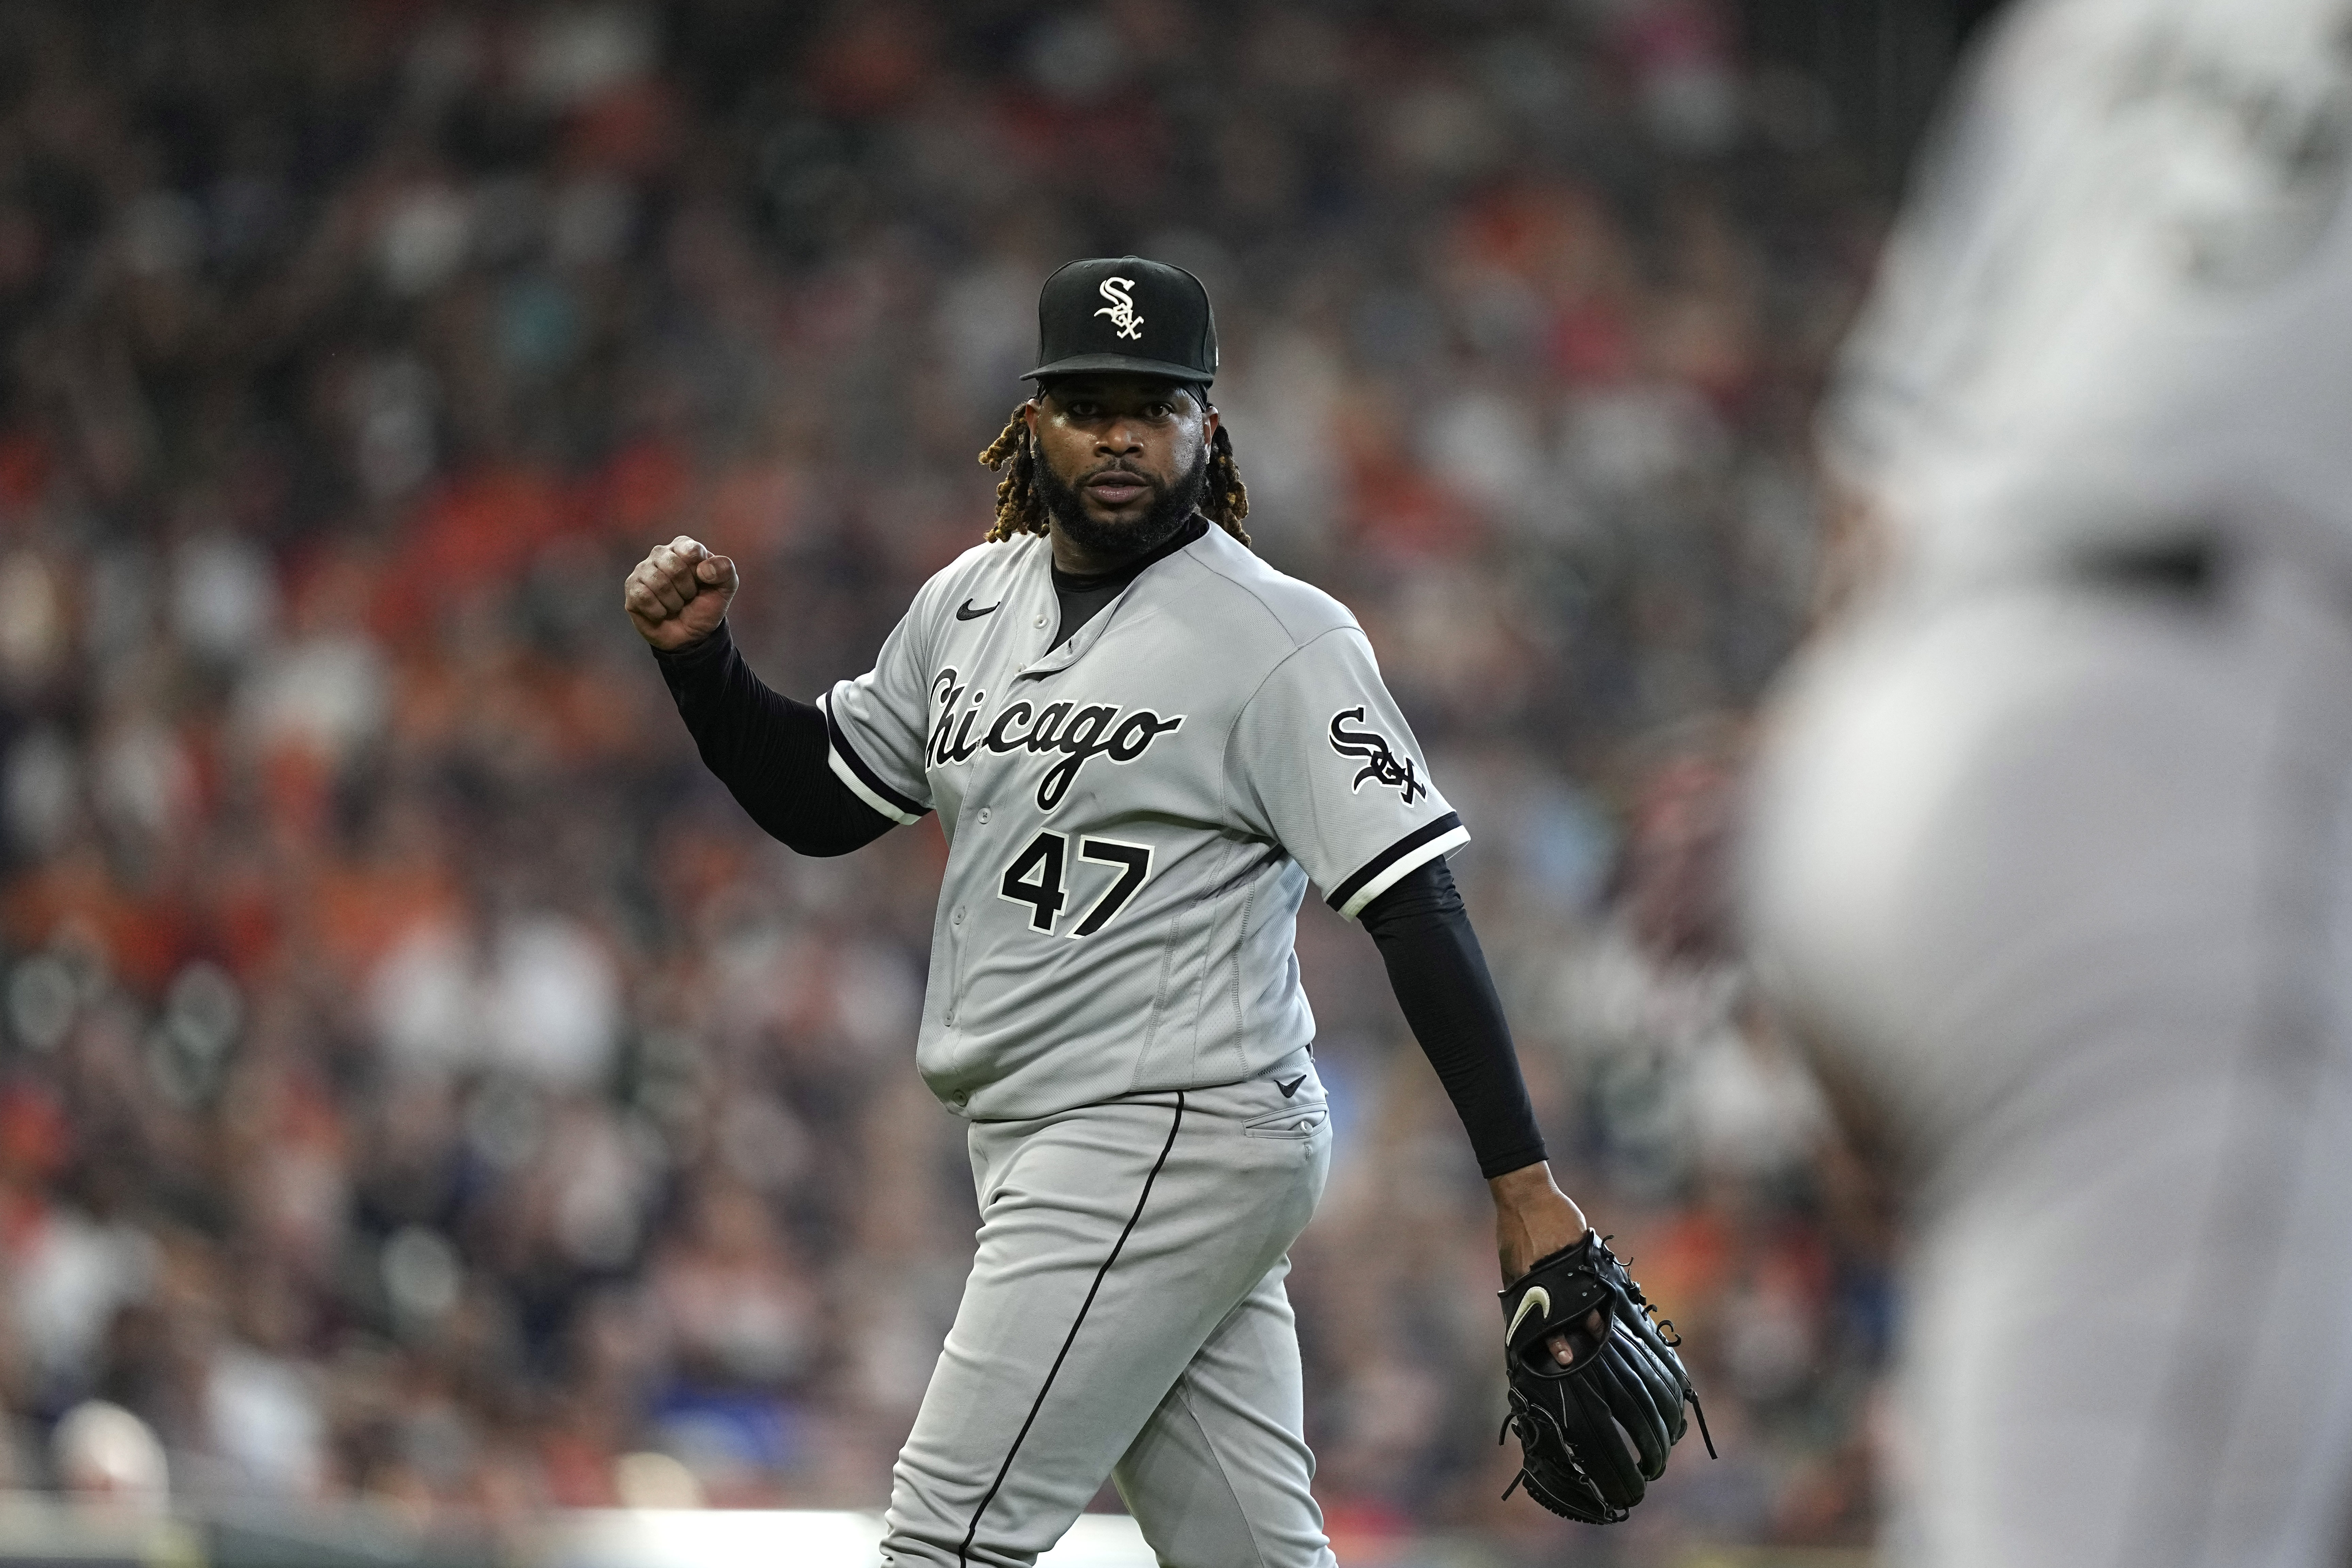 White Sox pitcher Johnny Cueto goes 7 innings in final outing of